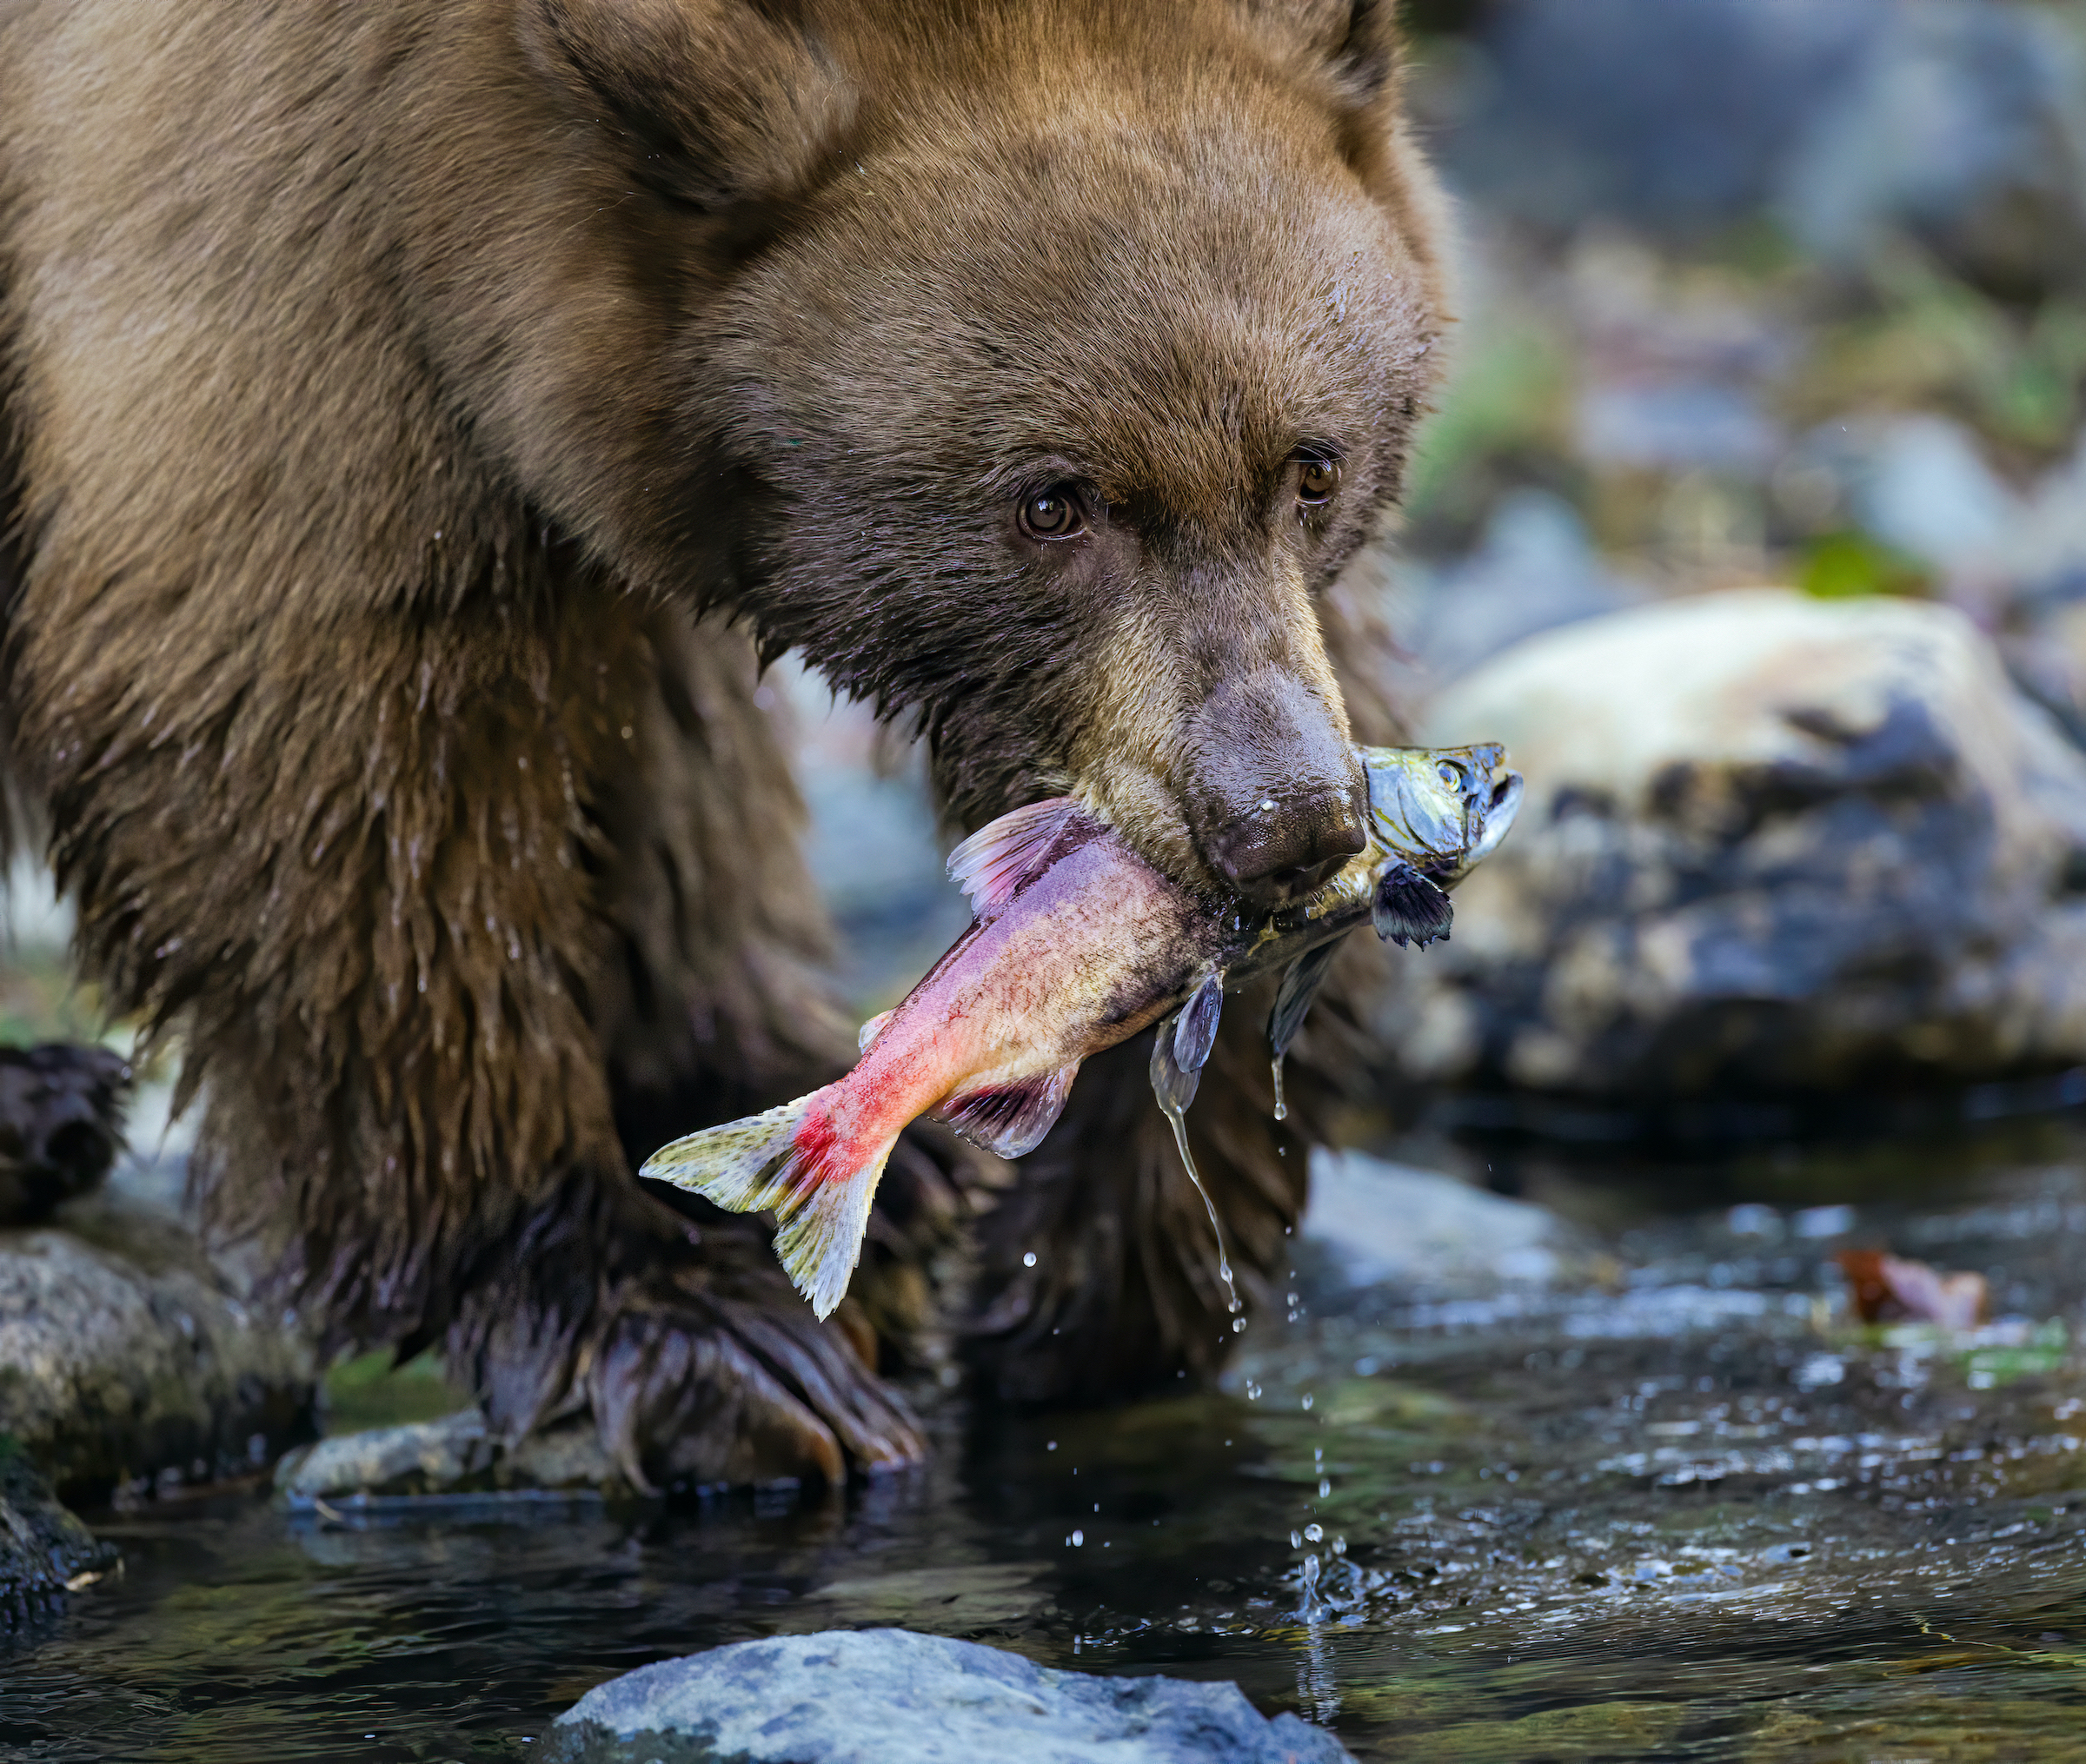 Acquired Taste:
Kokanee Salmon were anthropogenically (i.e. introduced by human) added to Lake Tahoe, California in the 1940s. ...